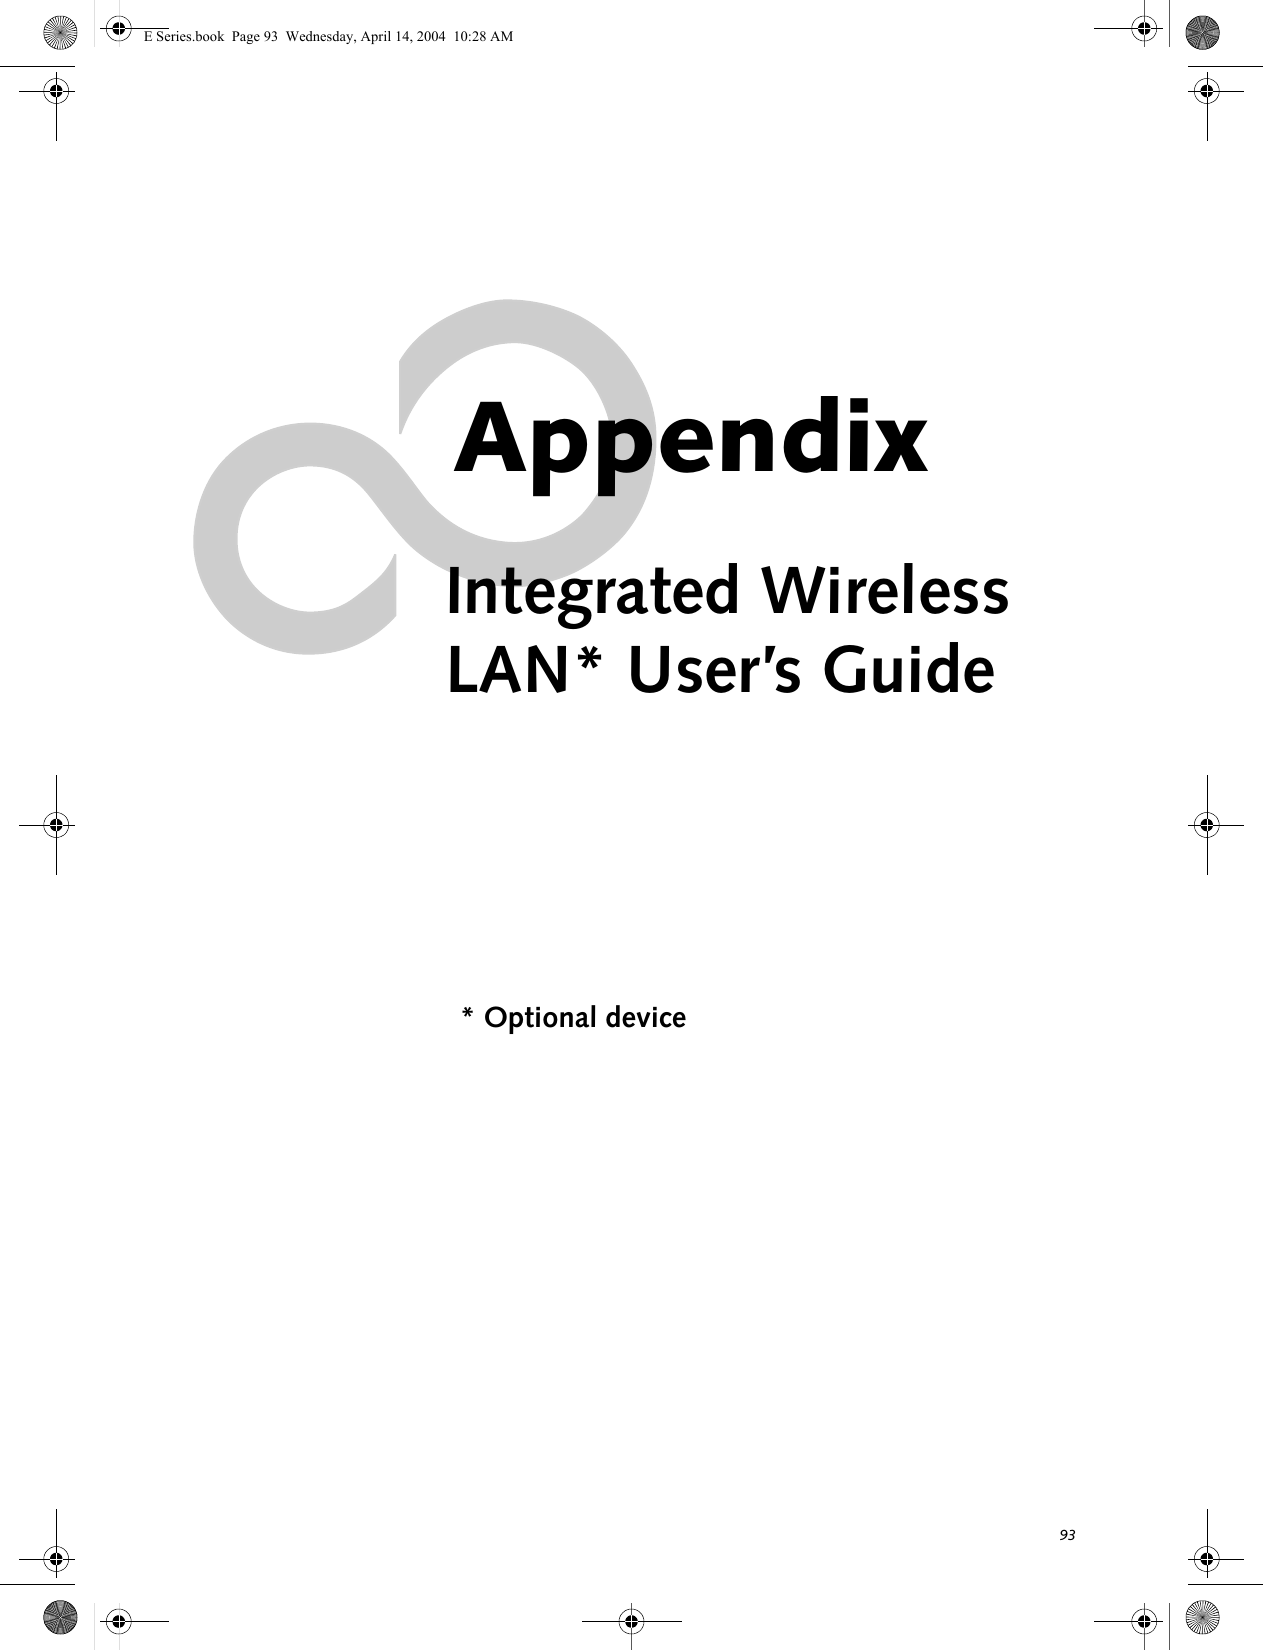 93AppendixIntegrated WirelessLAN* User’s Guide* Optional deviceE Series.book  Page 93  Wednesday, April 14, 2004  10:28 AM